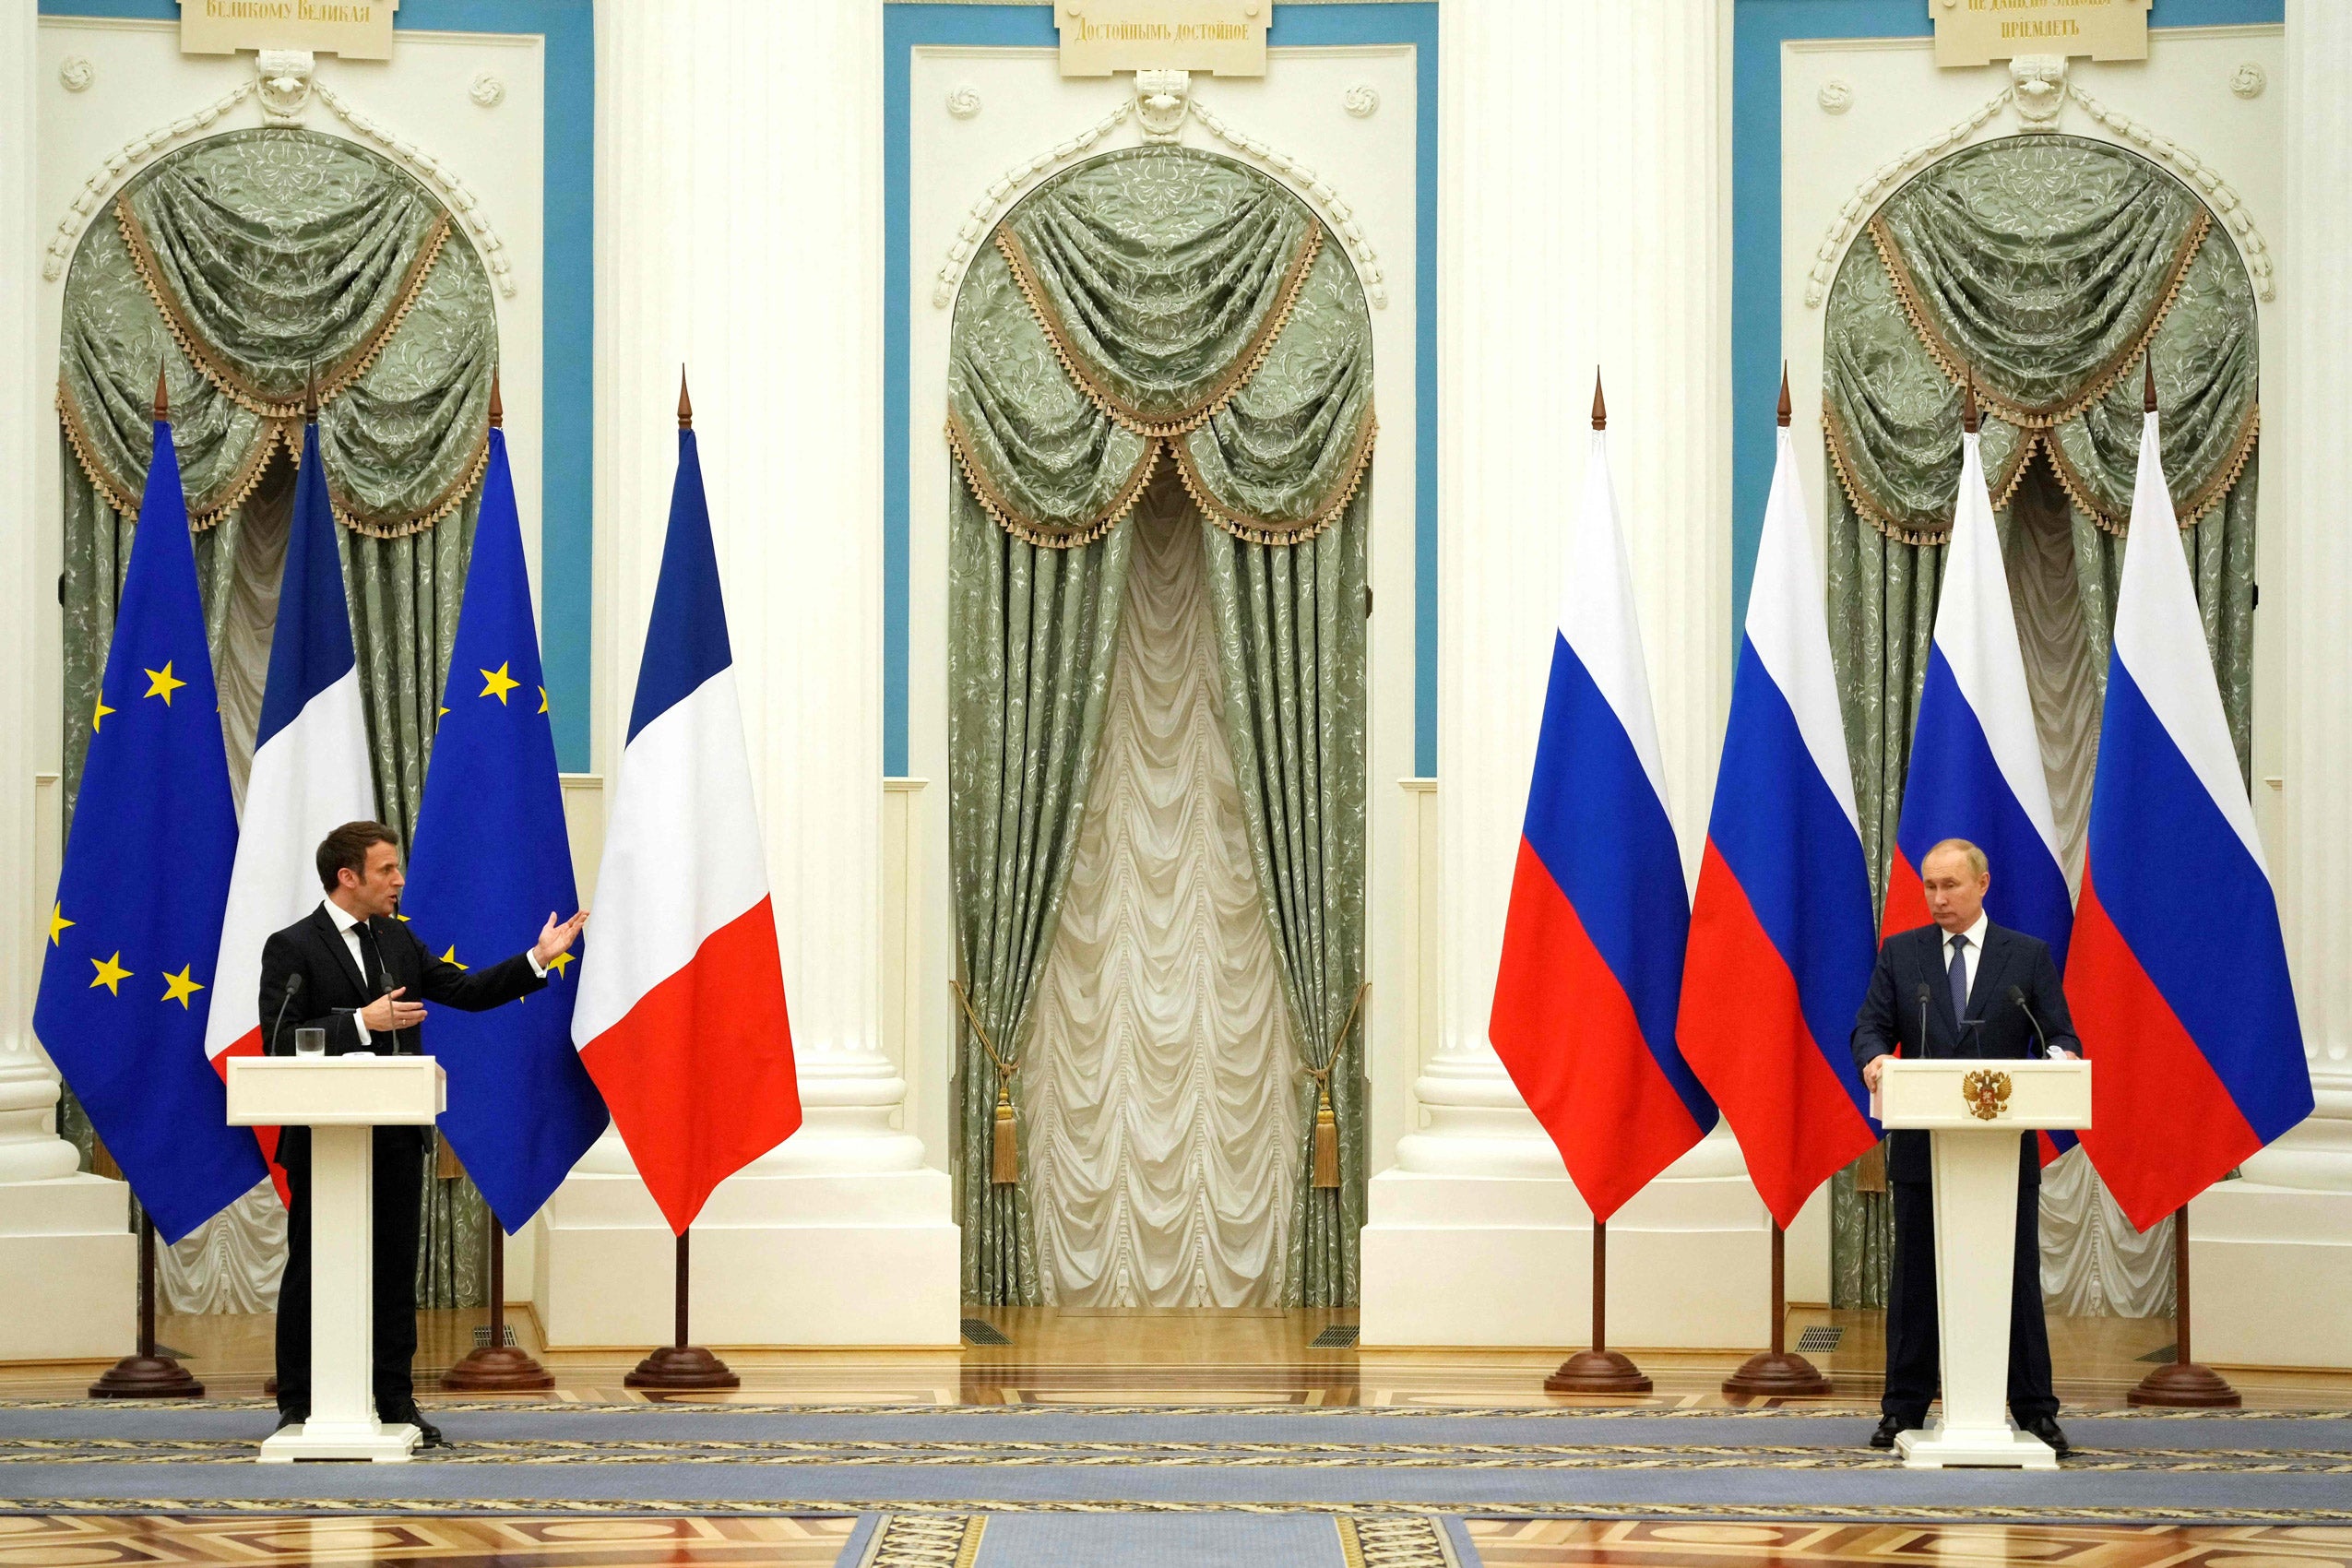 Two men speaking at white podiums with flags behind them